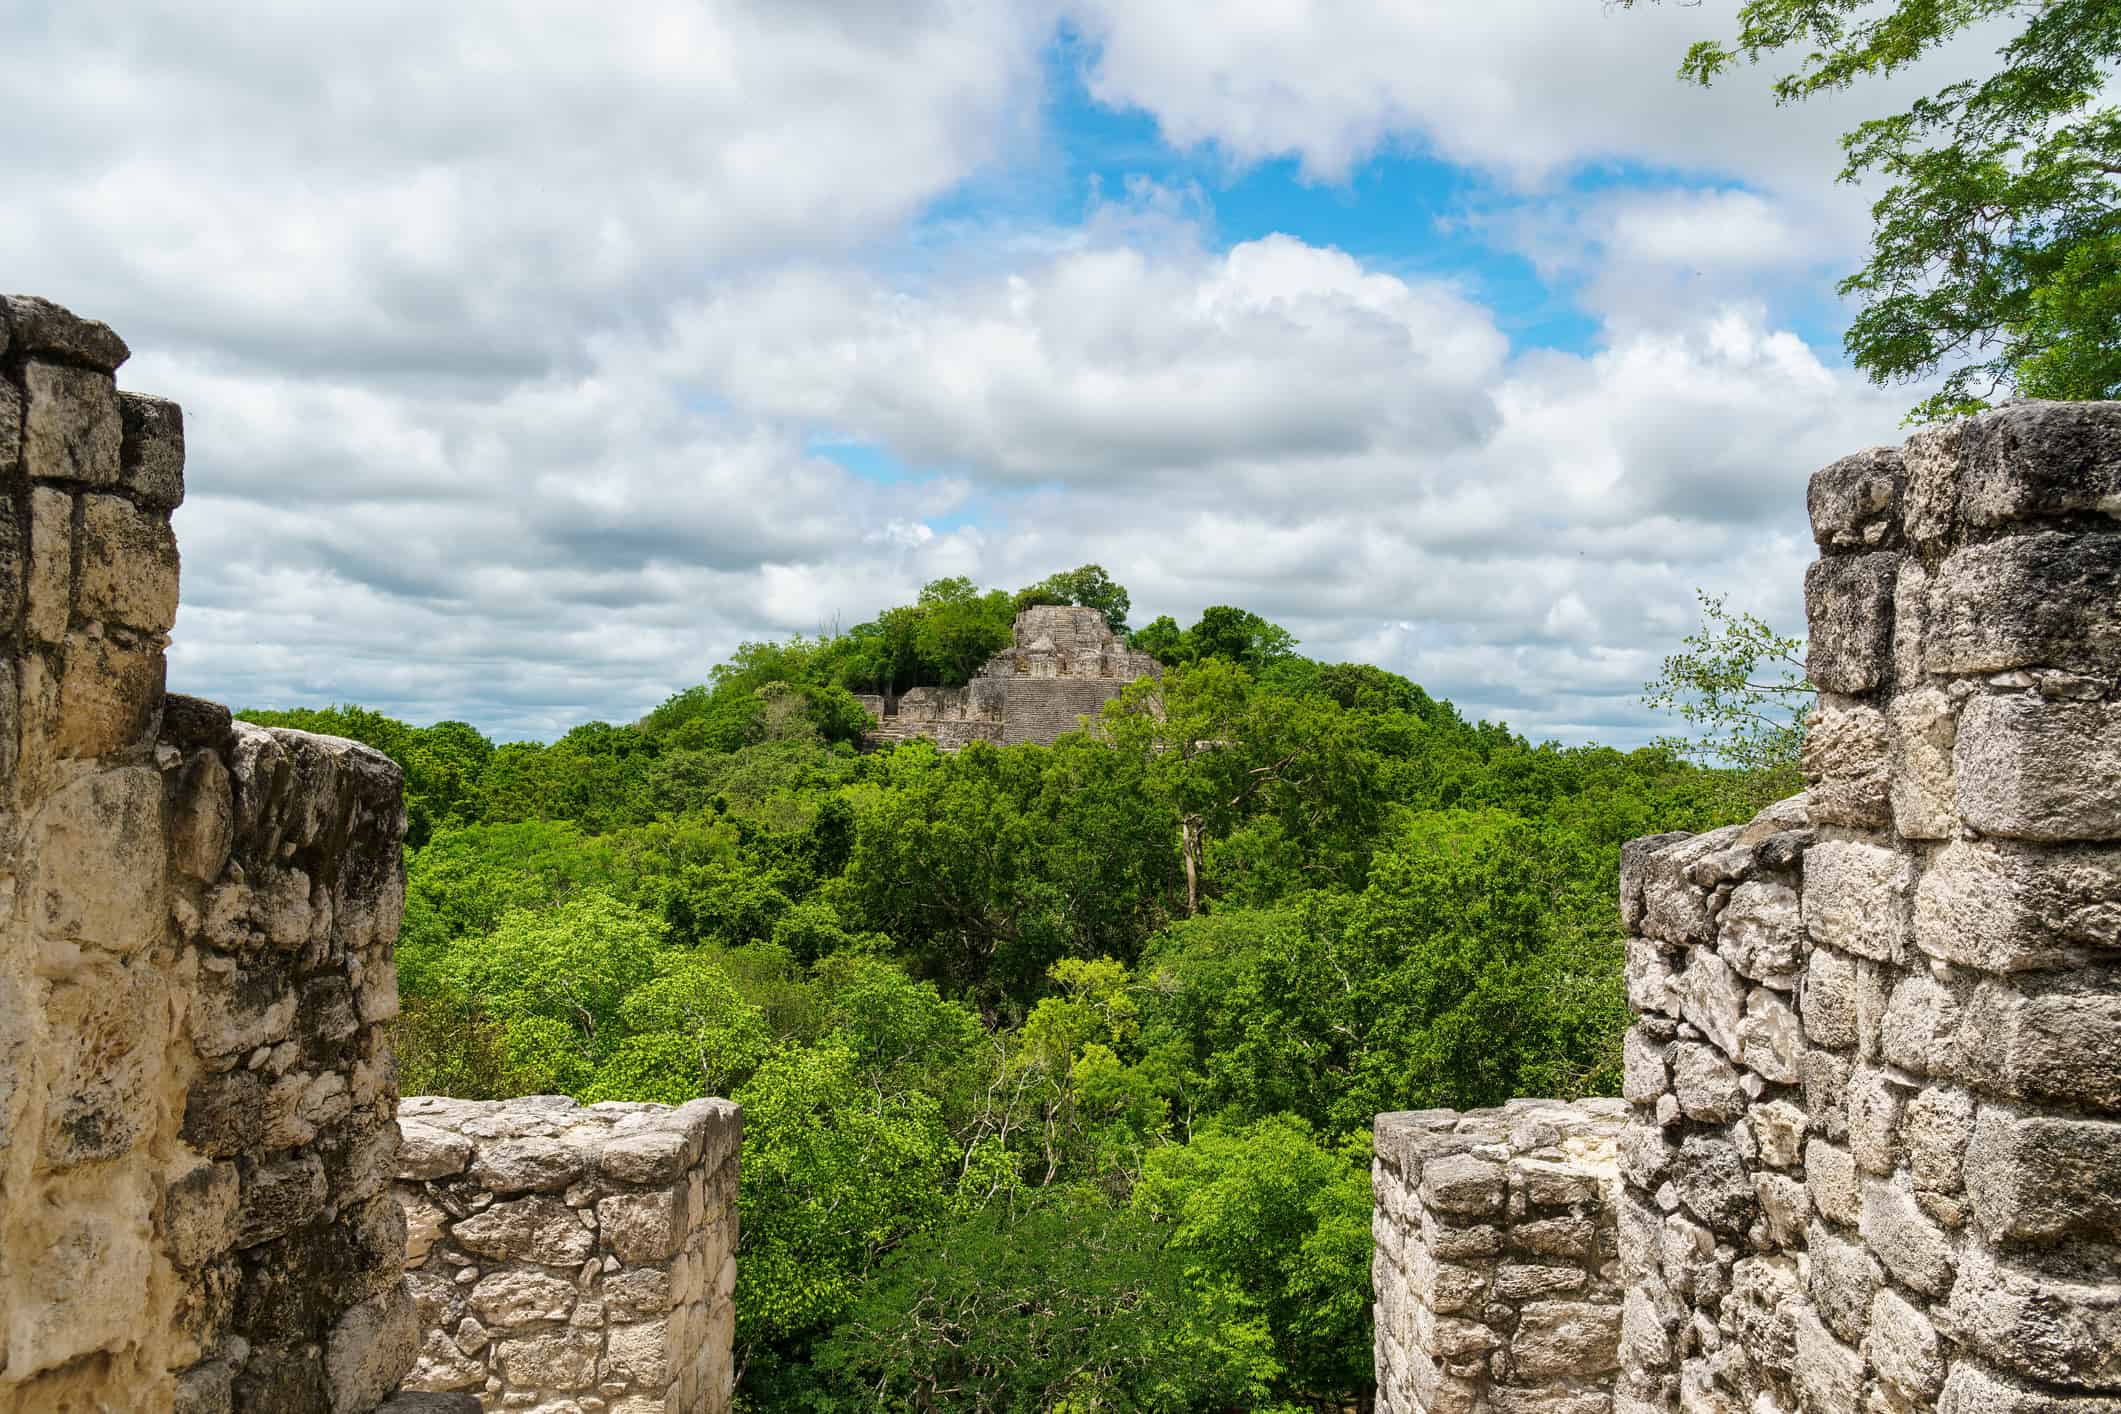 Calakmul ruins above the trees viewed through stone walls